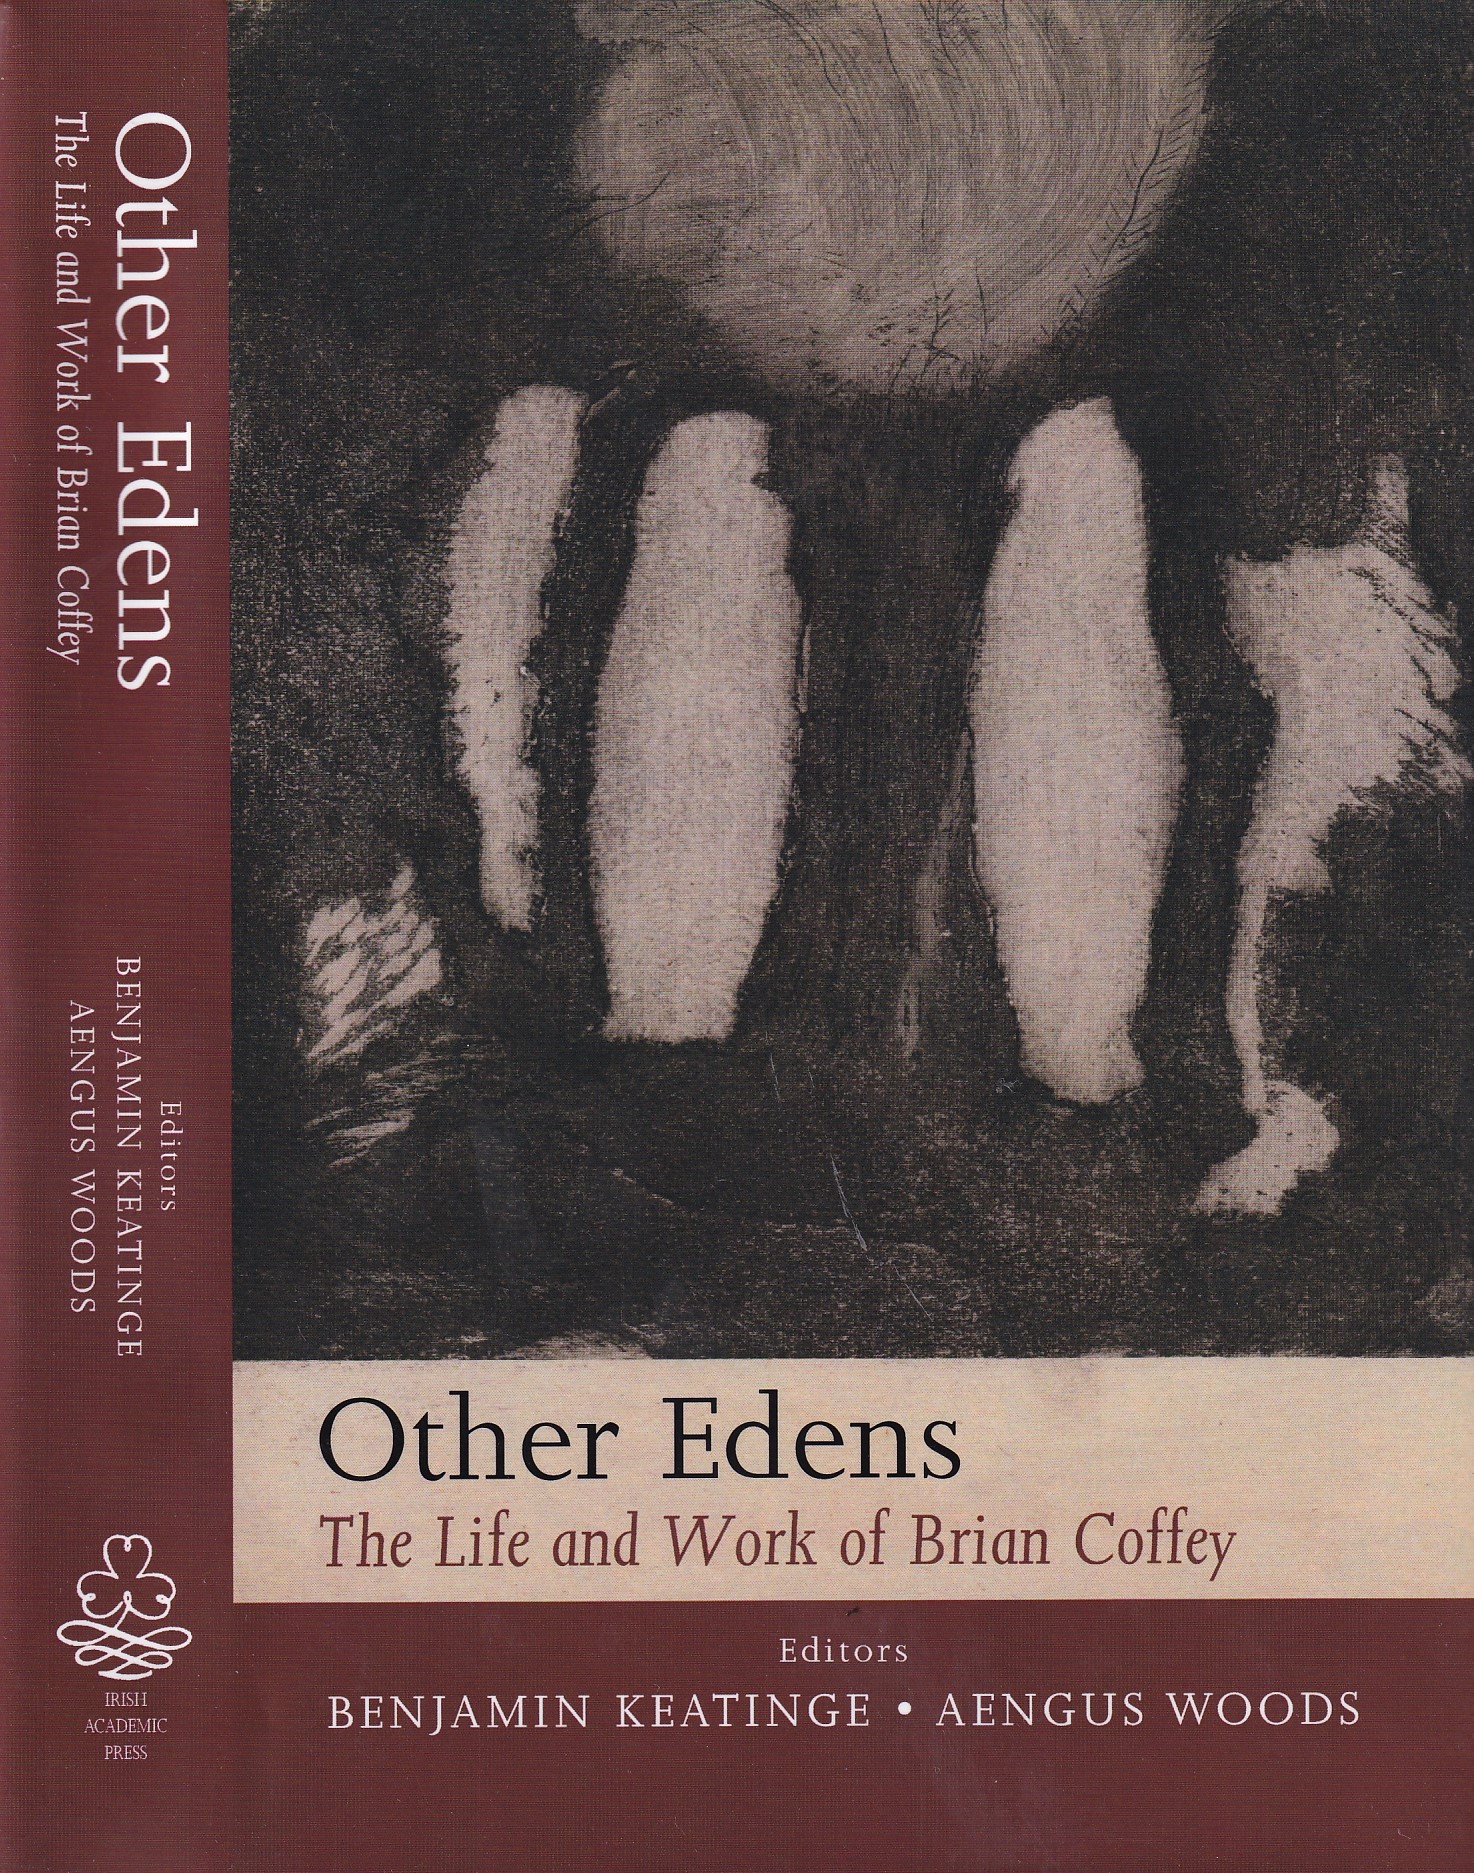 Other Edens: The Life and Work of Brian Coffey | Benjamin Keatinge and Aengus Woods | Charlie Byrne's